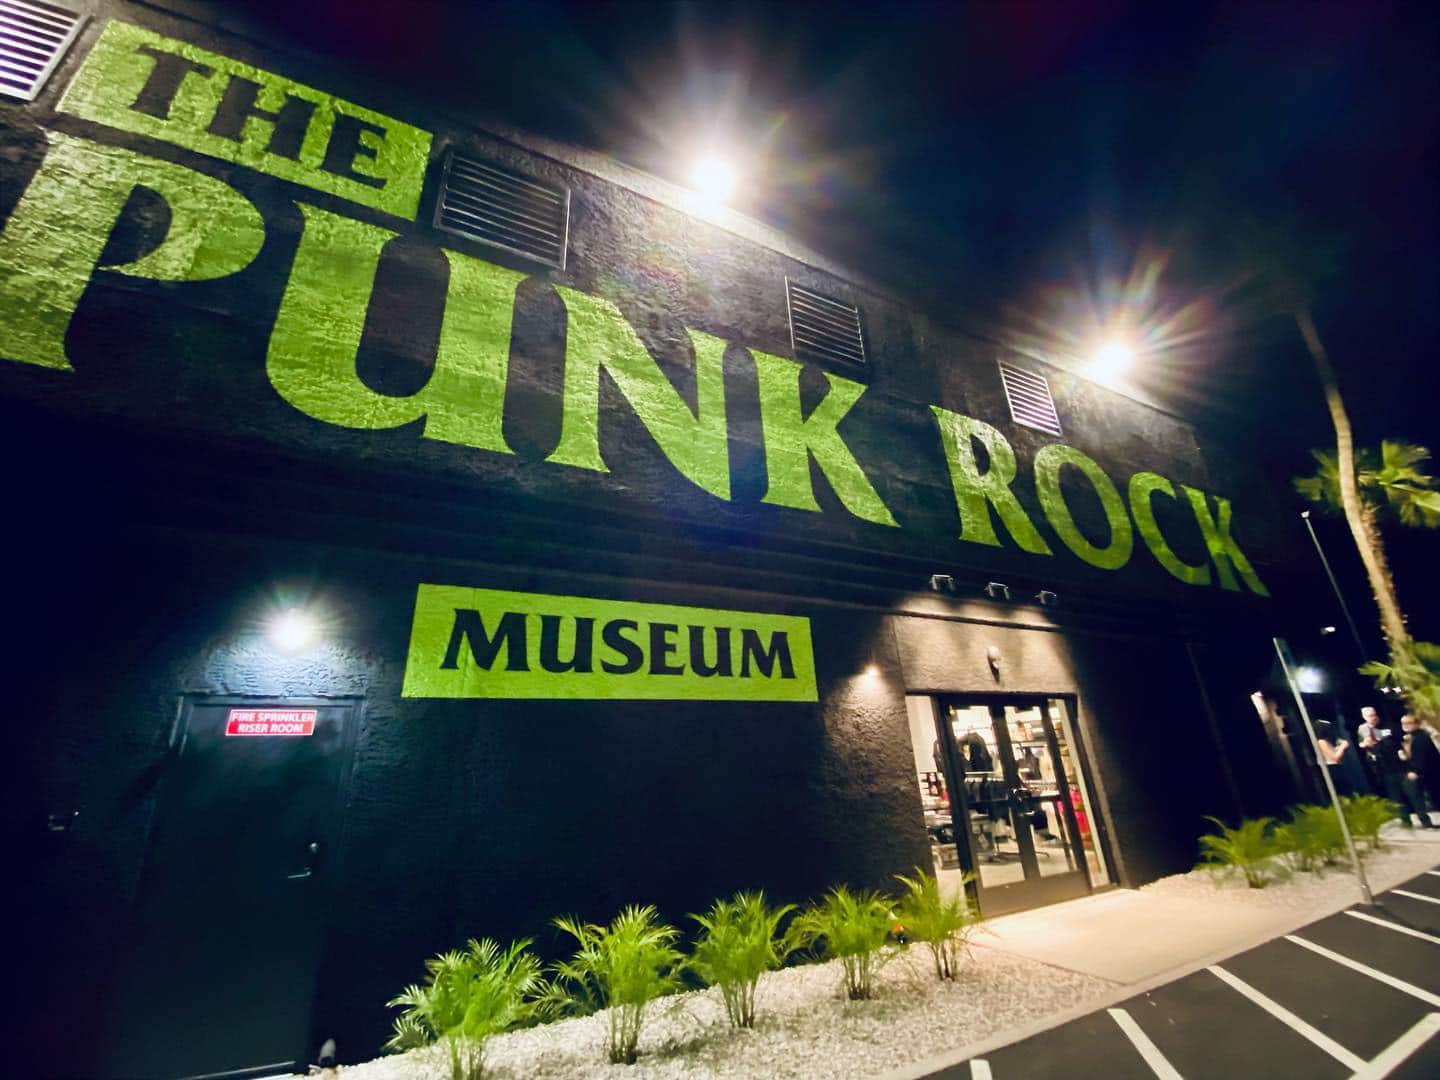 This is our life': The Punk Rock Museum opens in Vegas, Travel